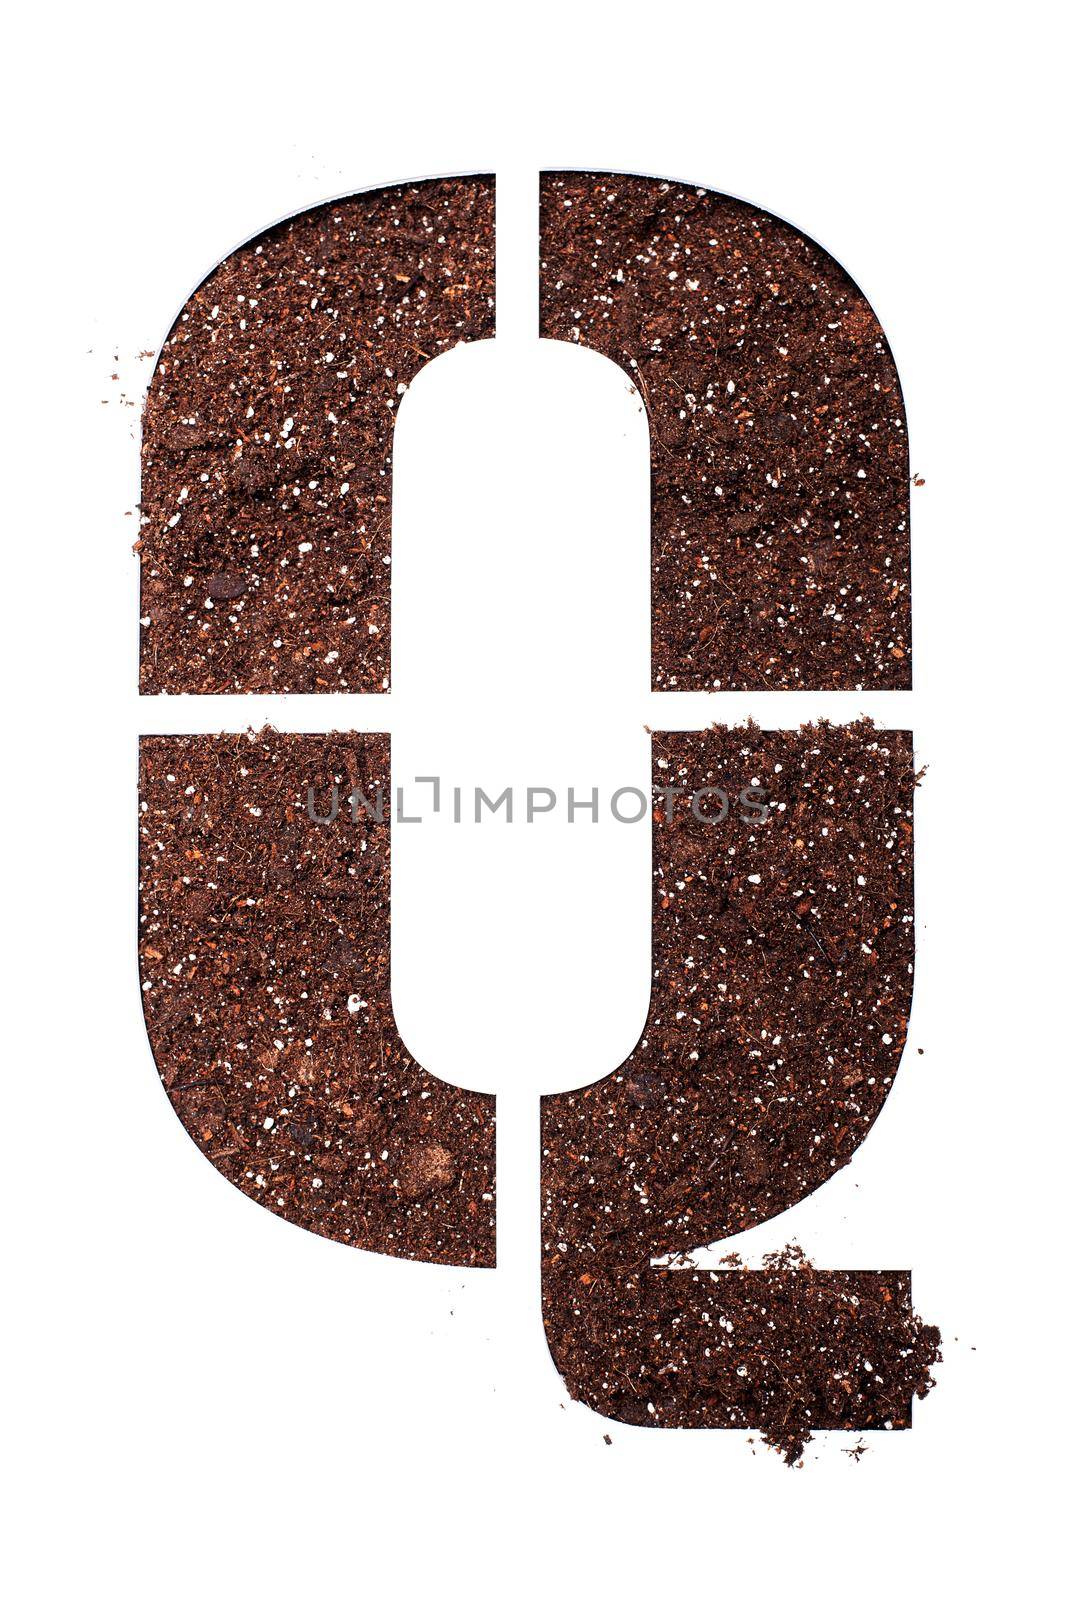 stencil letter Q made above dirt on white surface by kokimk